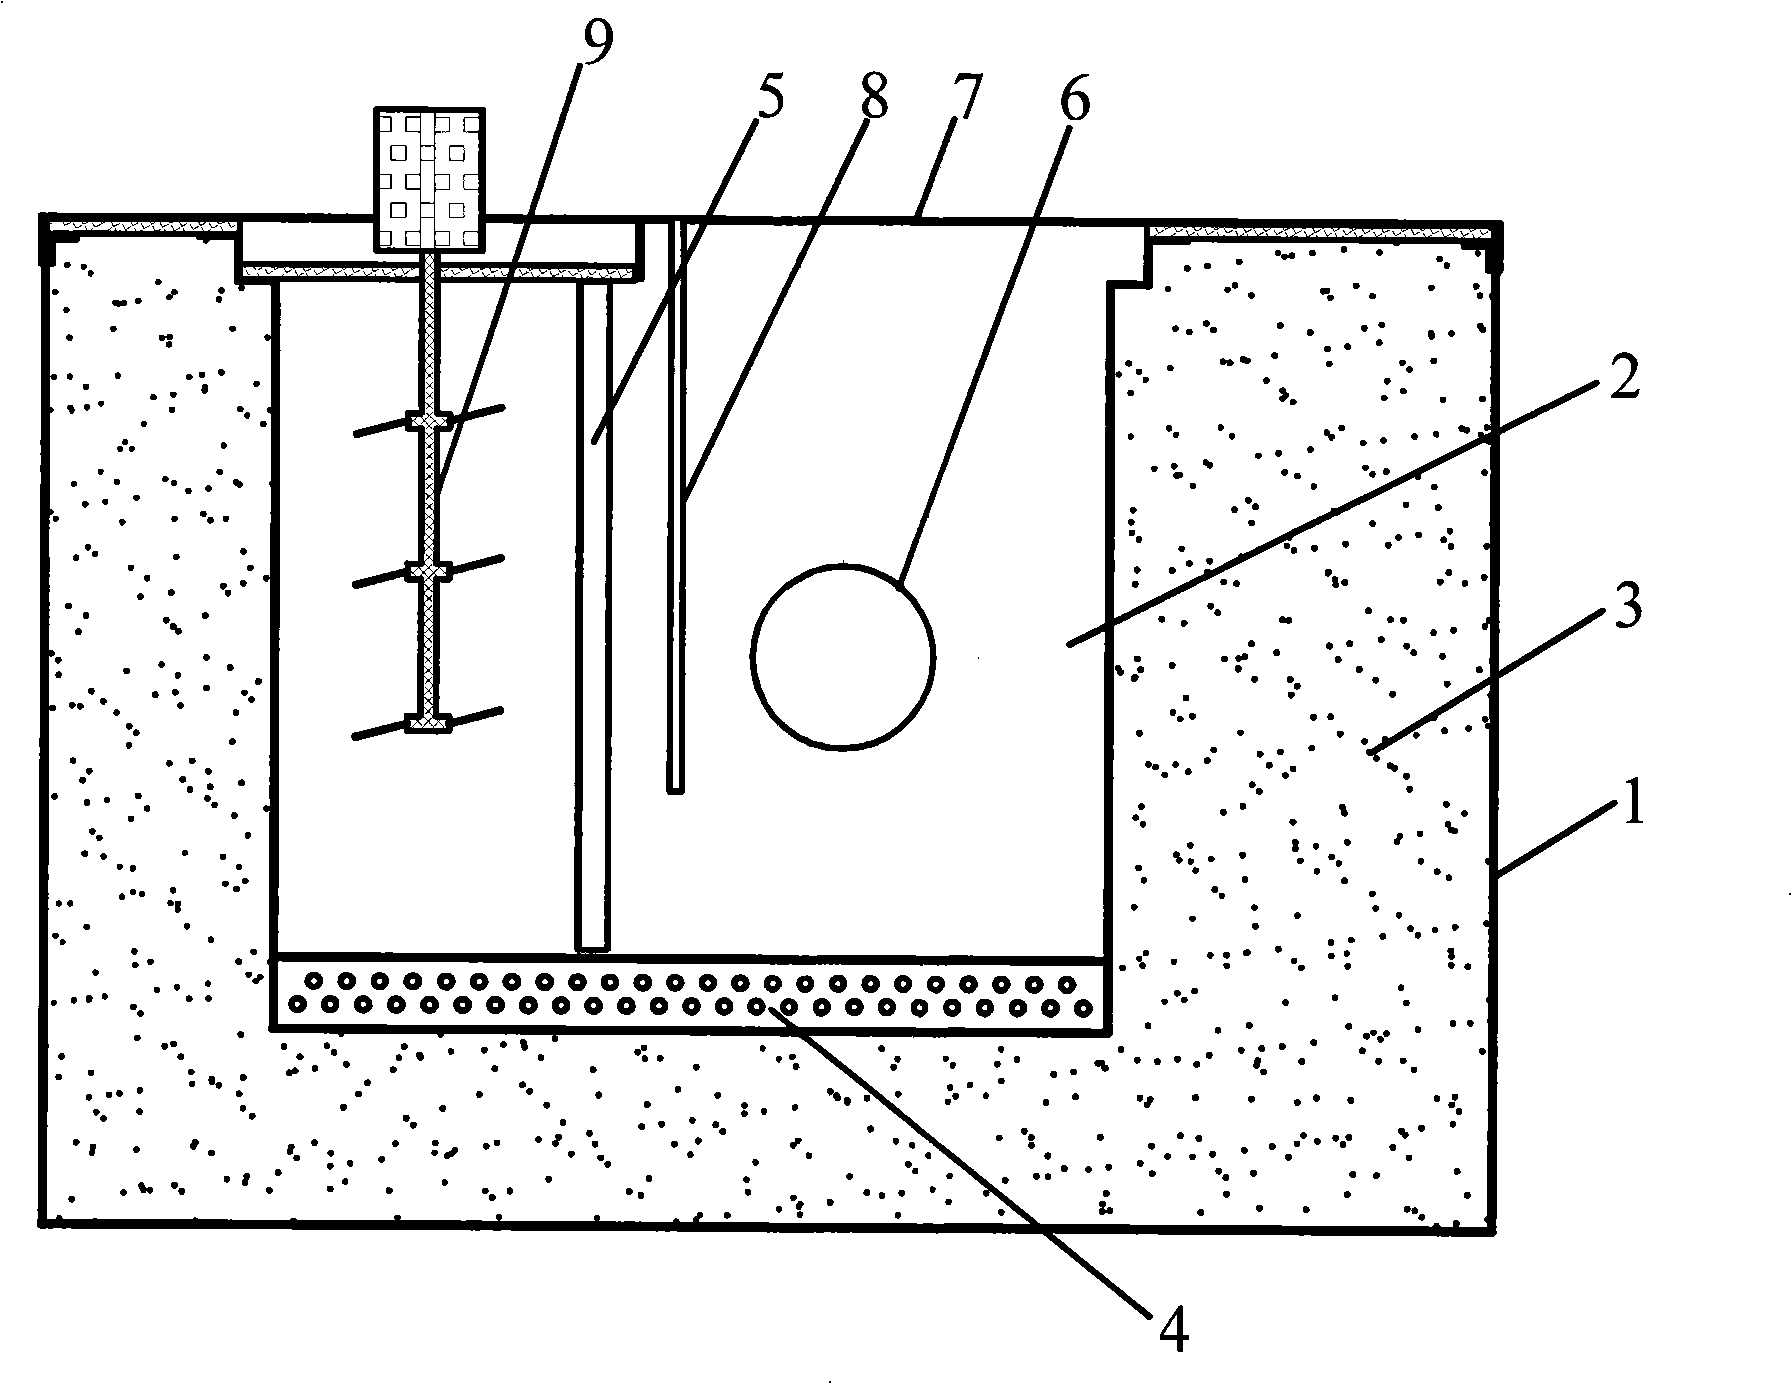 Experiment platform for fluid thermophysical property measurement